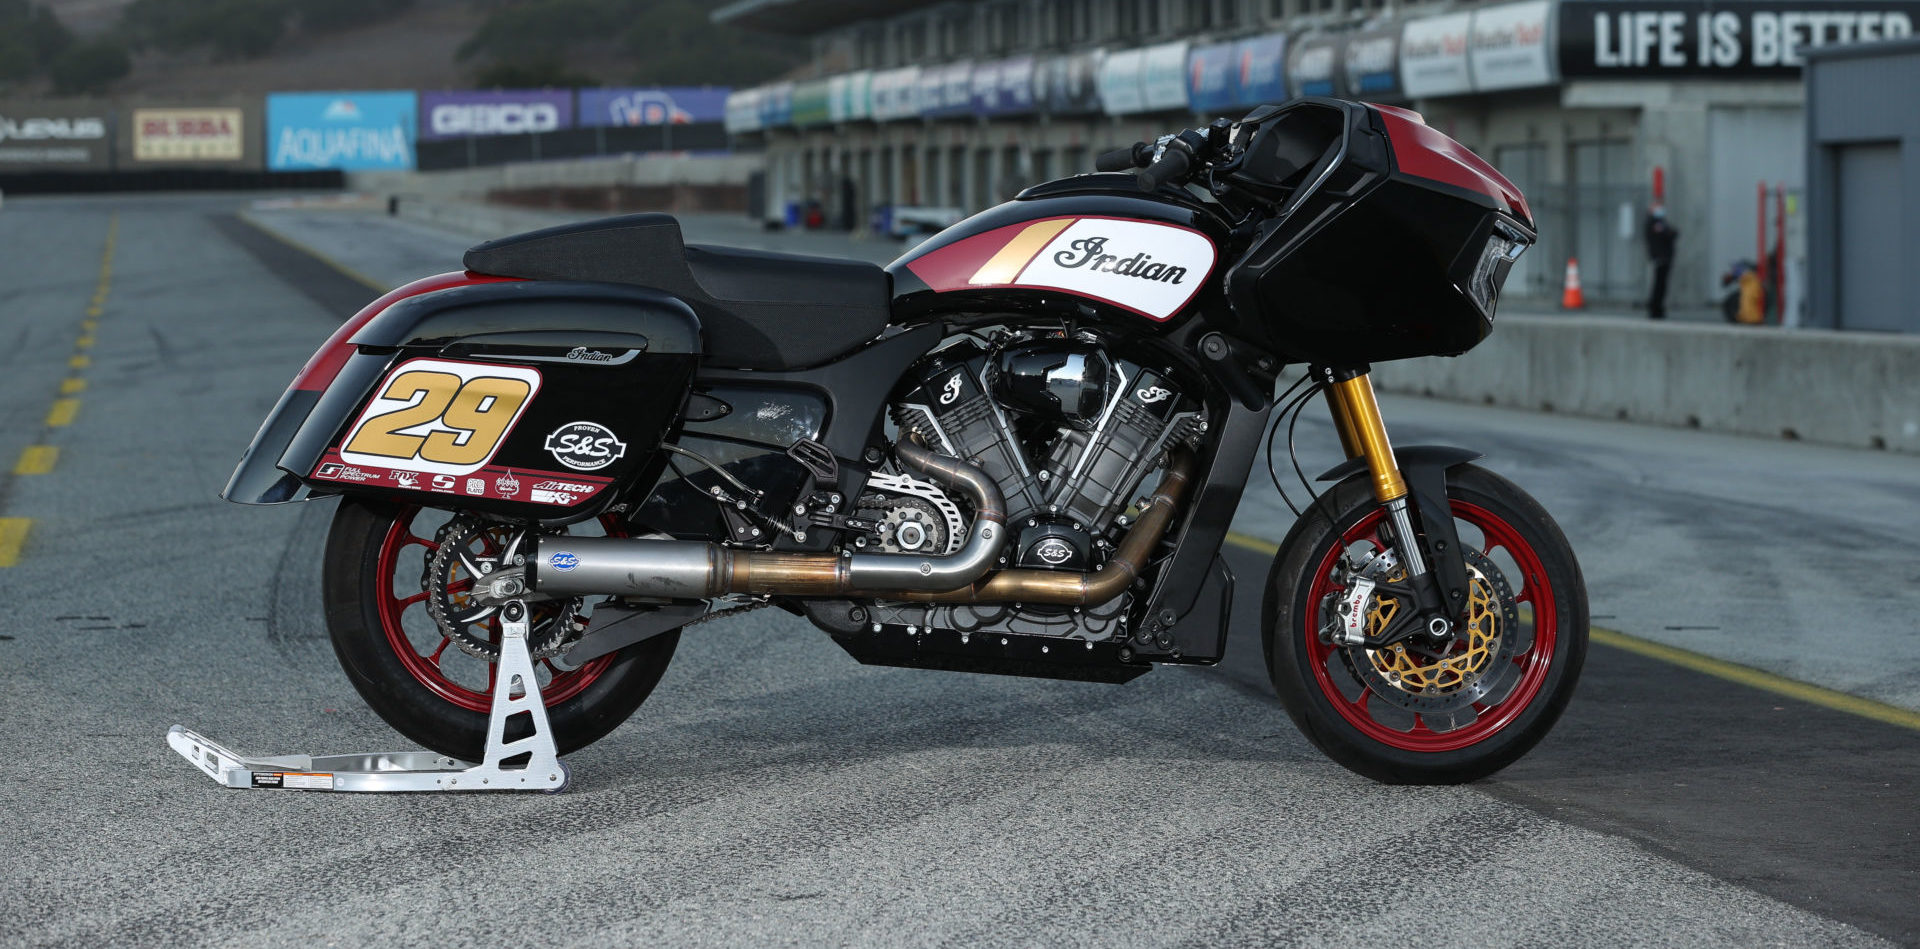 Tyler O’Hara’s Indian Challenger King of the Baggers racebike. Photo by Brian J. Nelson.